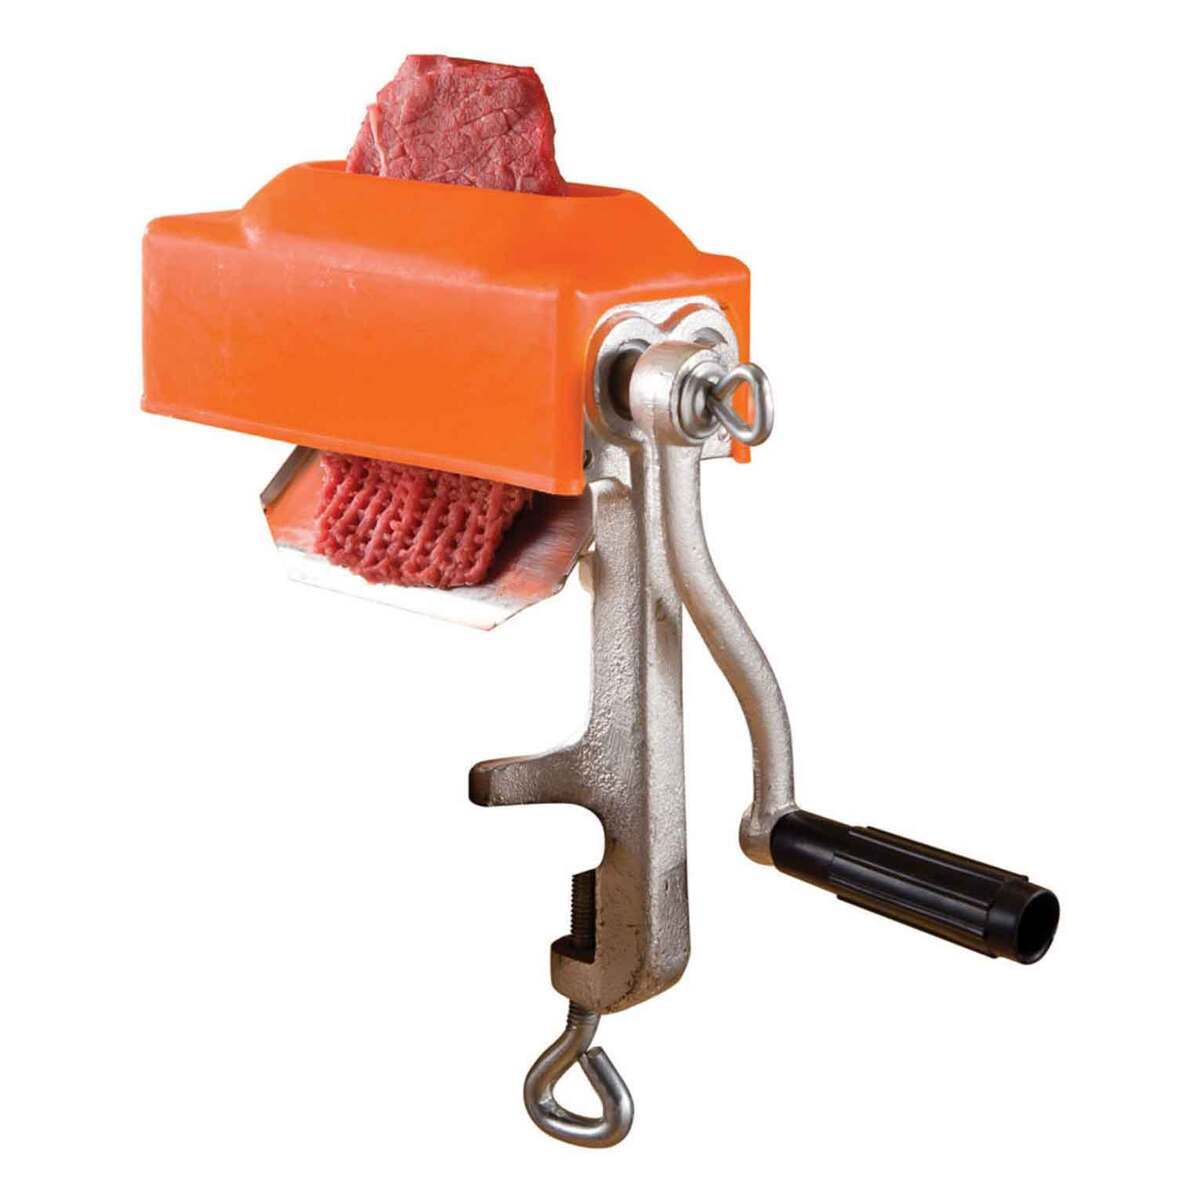 Meat Tenderizer - Jerky Making Like A Pro with This Tool!